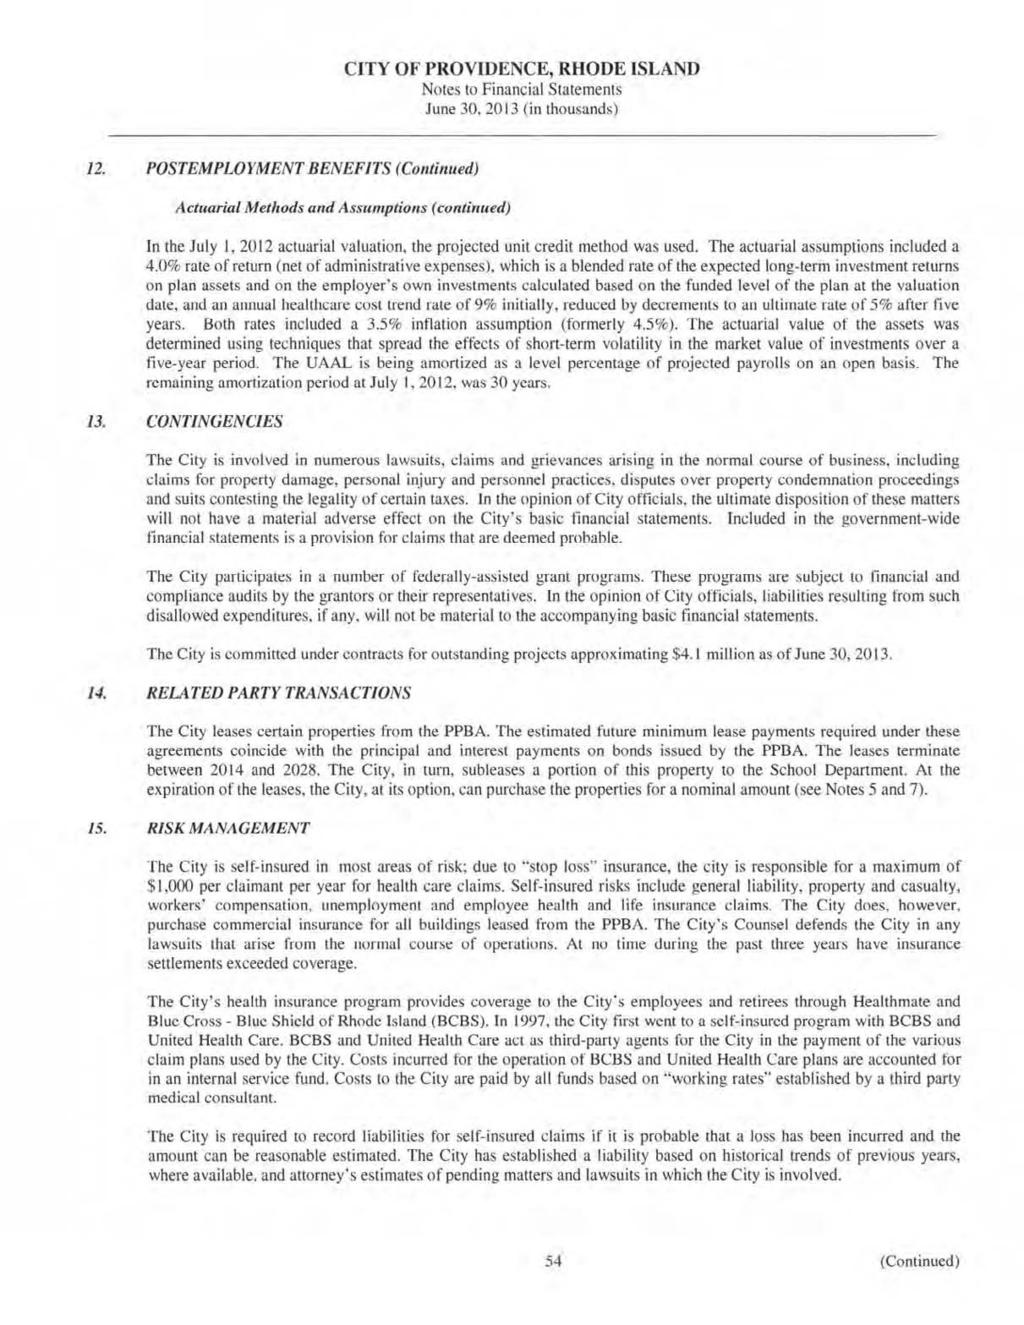 CITY OF PROVIDENCE, RHODE ISLAND Notes to Financial Statements June 30, 2013 (in thousands) 12.